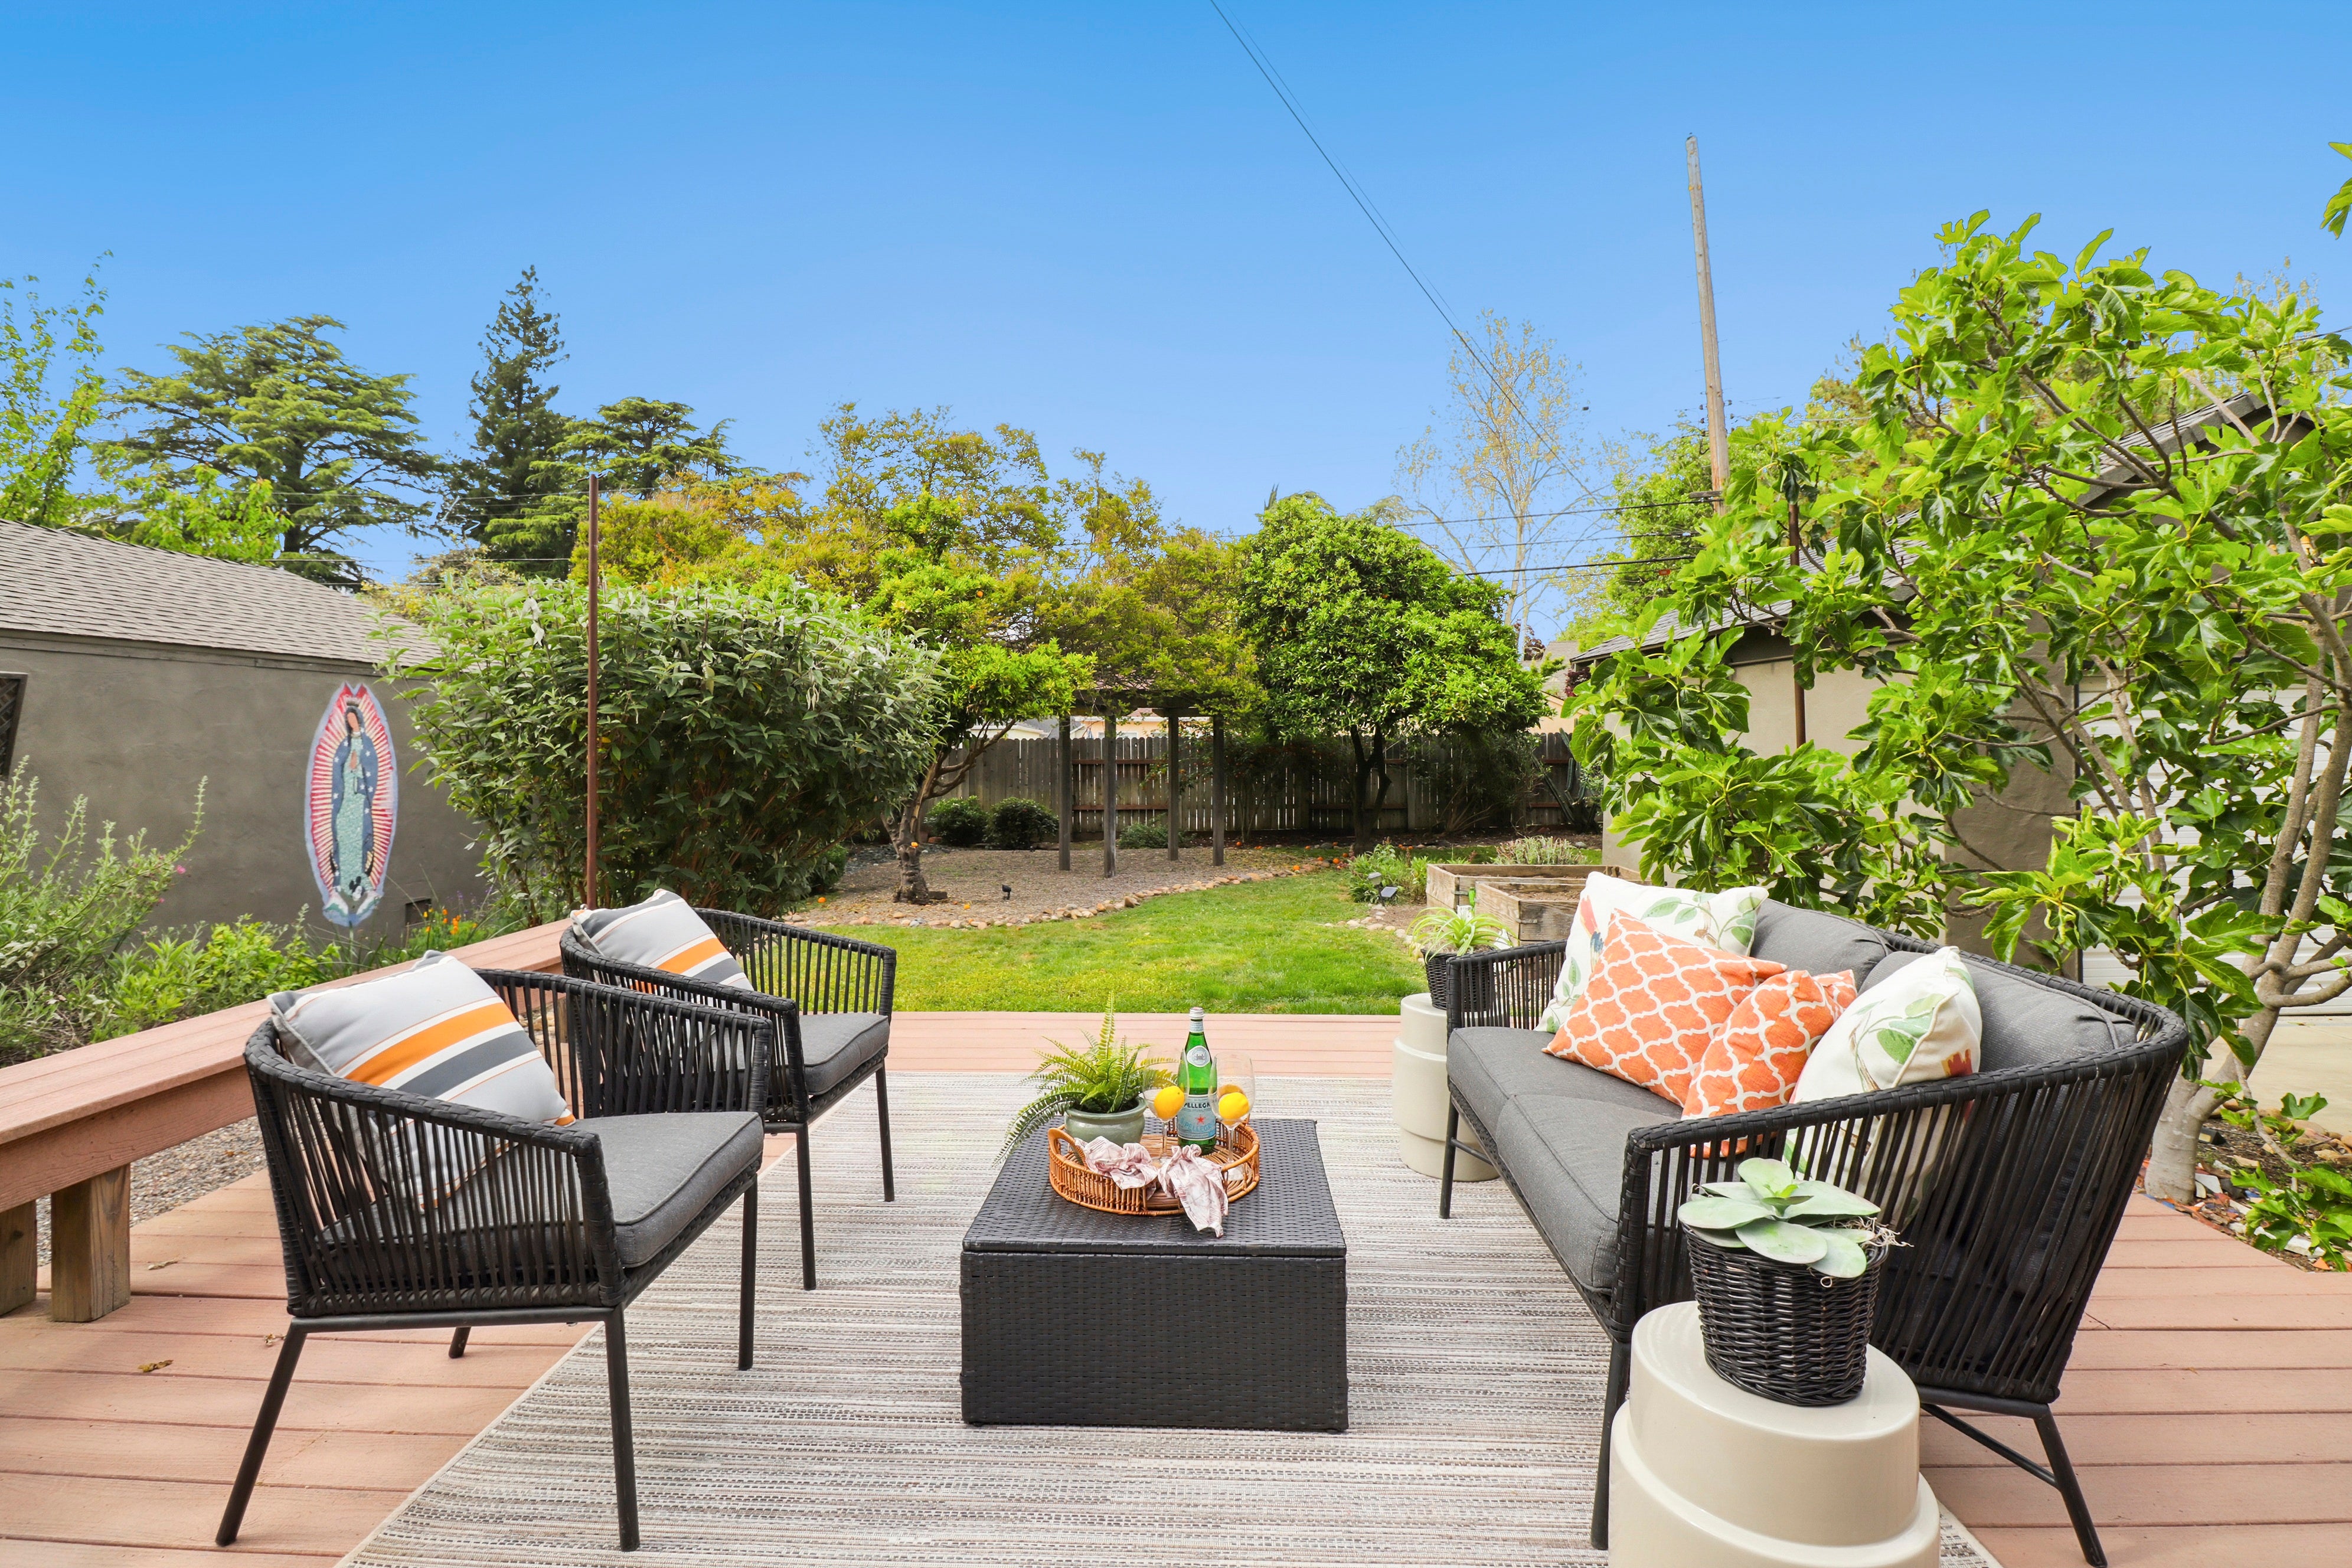 Premiere Home Staging Projects | Outdoor space design idea - Robertson Way, Sacramento